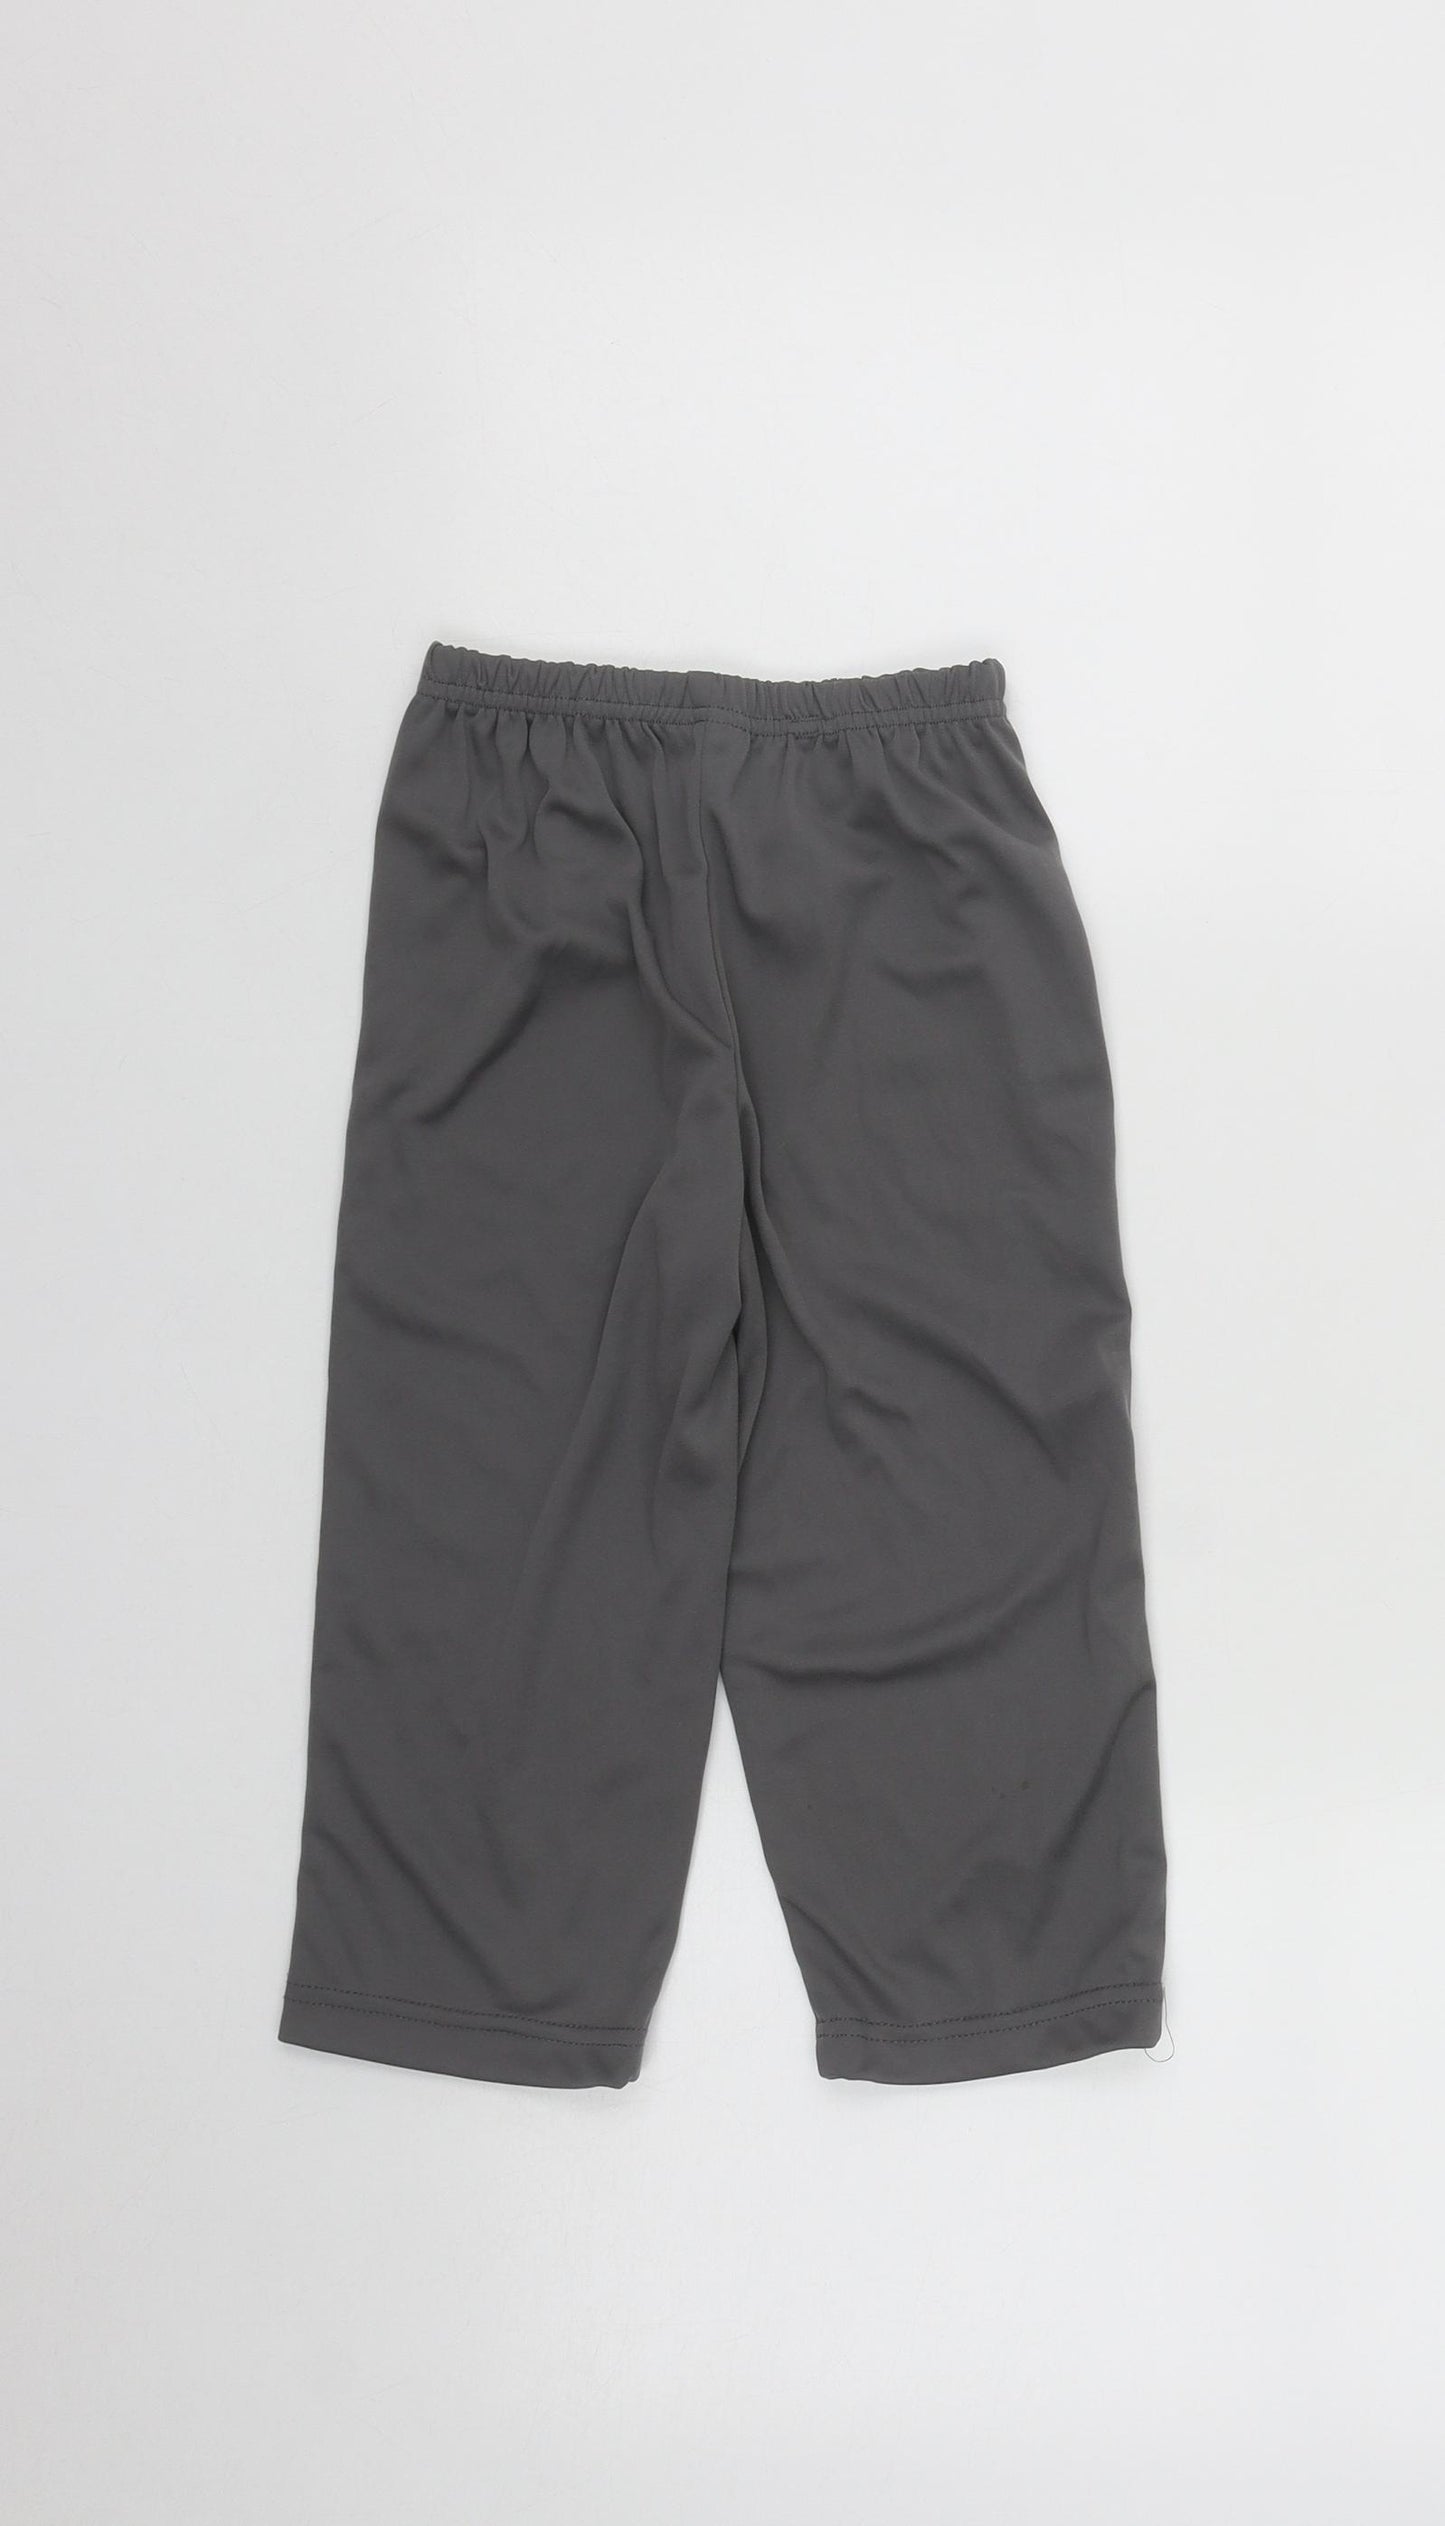 Lily & Dean Boys Grey  Polyester Jogger Trousers Size 3 Years  Regular